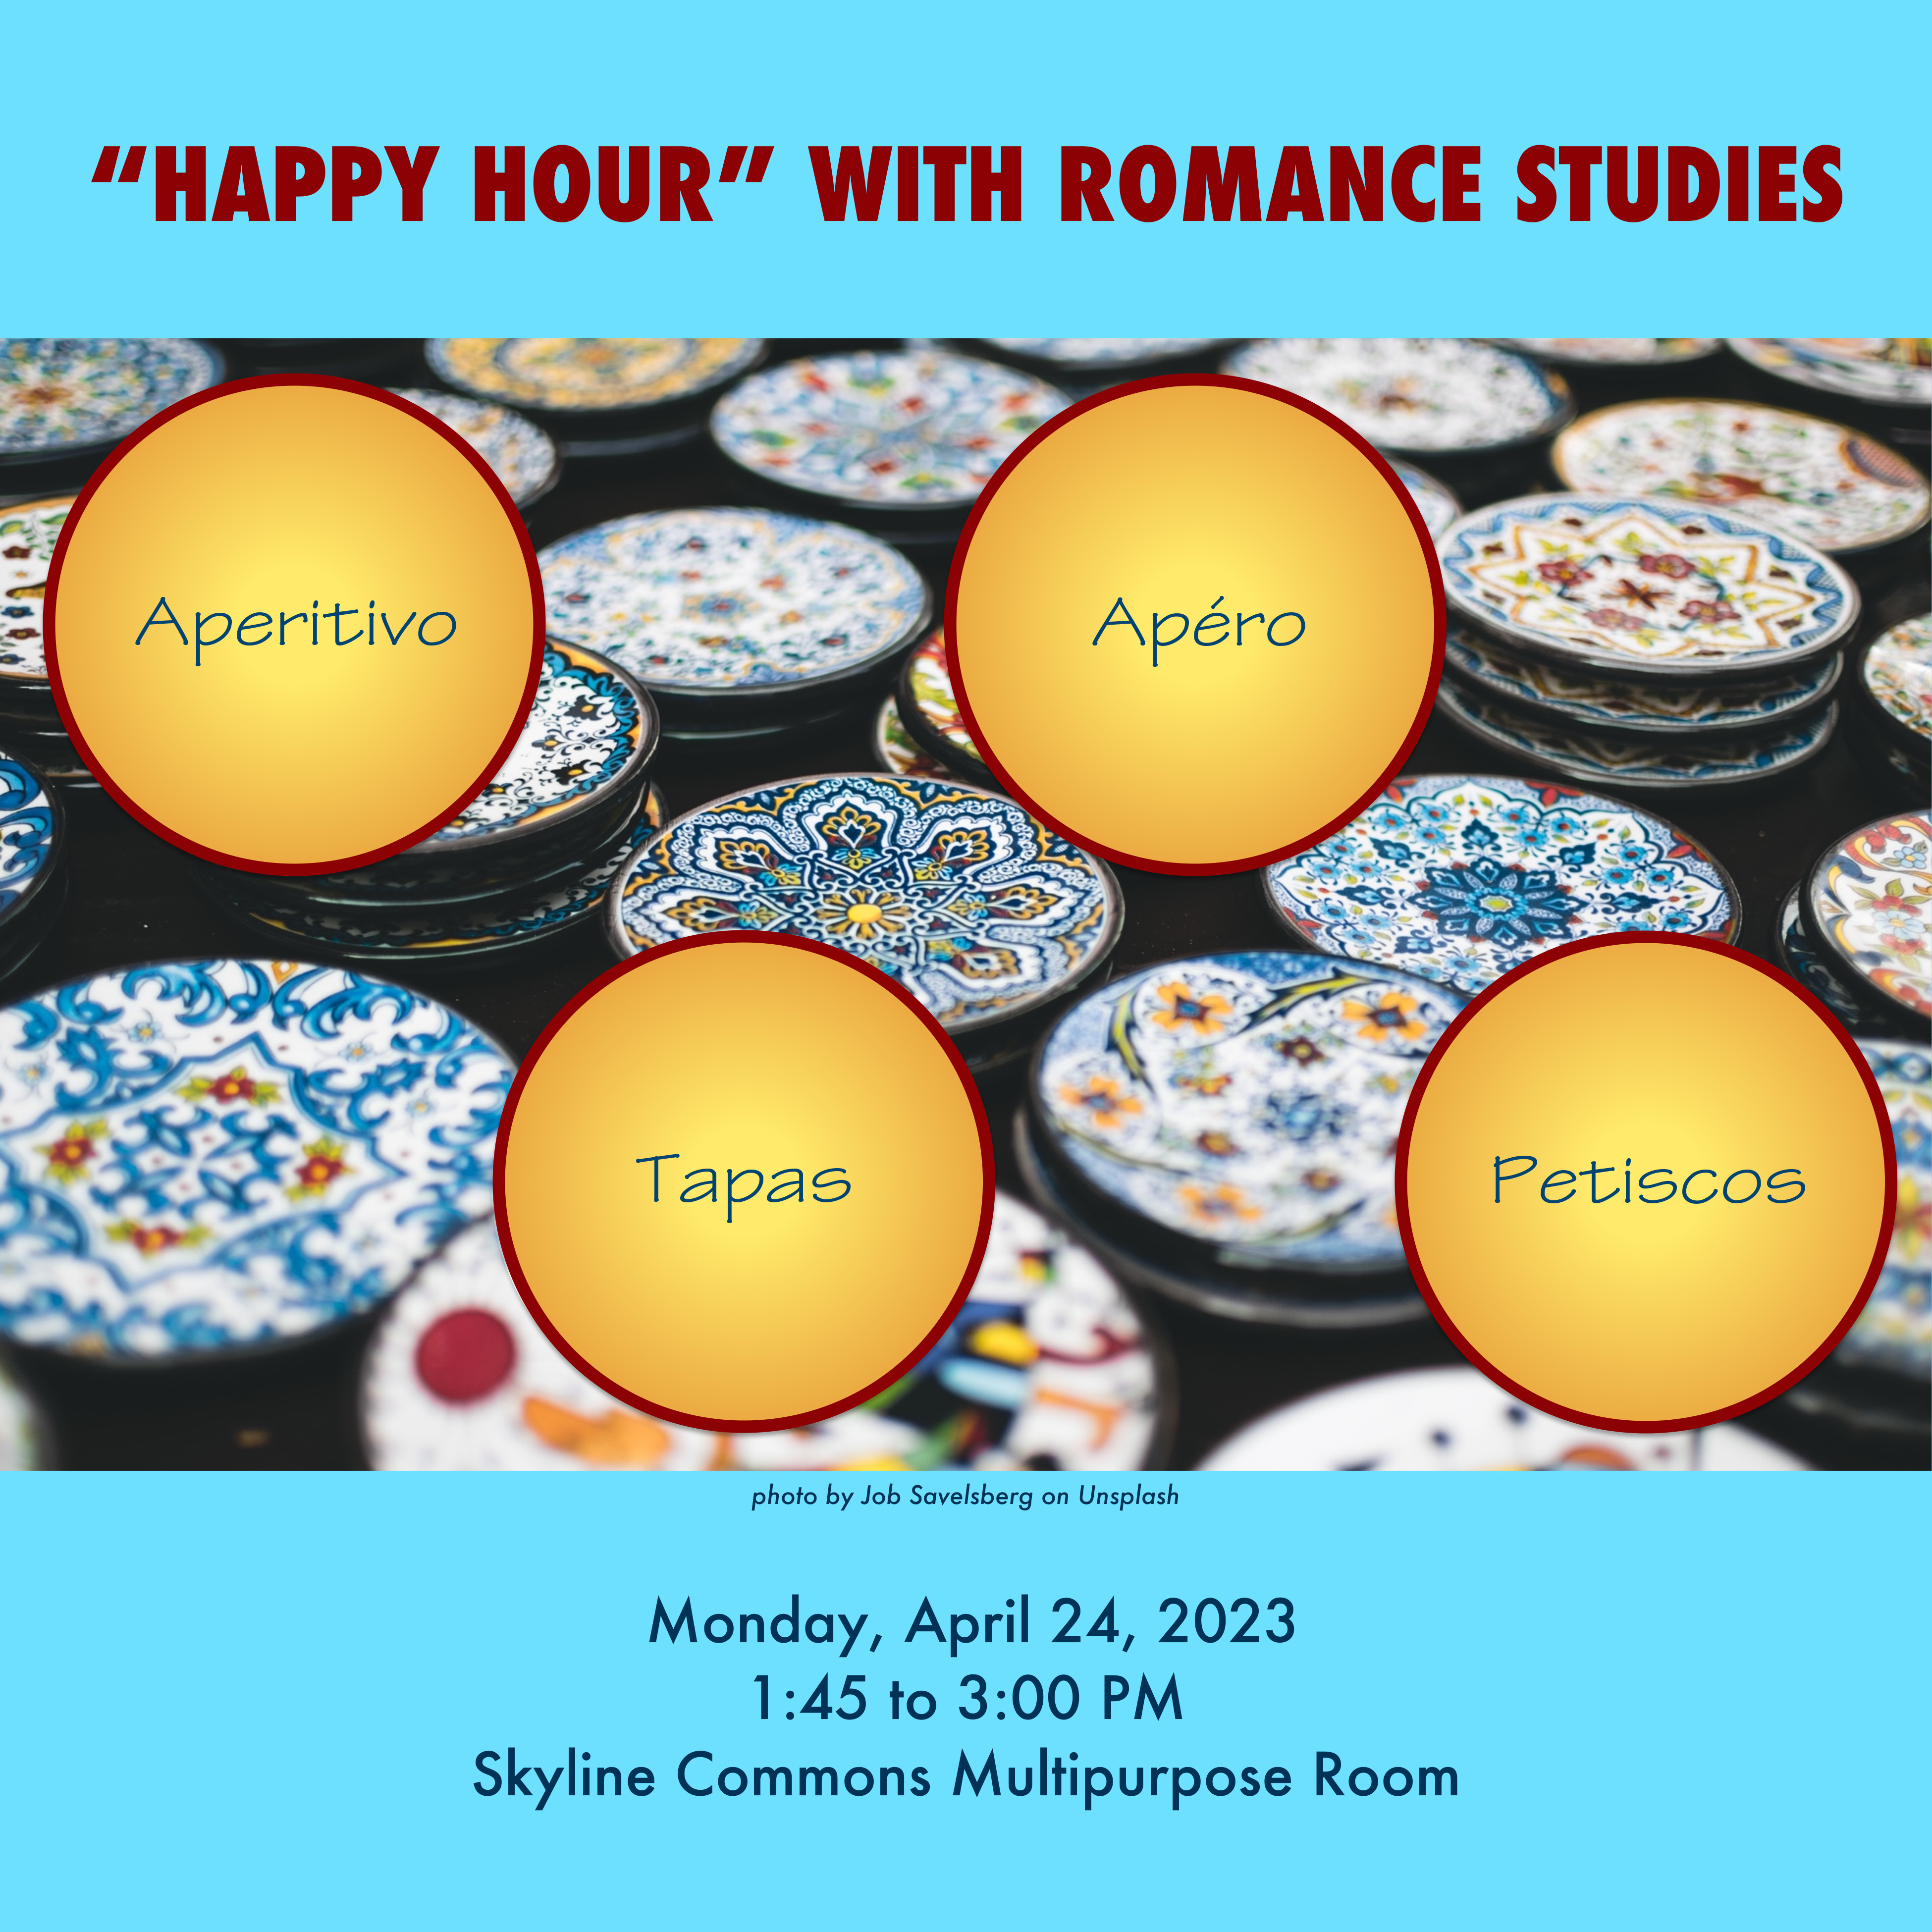 poster for "Happy Hour" with ROMS event with photo of small plates by Job Savelsberg on Unsplash and circles that say "Aperitivo, Apéro, Tapas, and Petiscos". text reads: “HAPPY HOUR” WITH ROMANCE STUDIES. Monday, April 24, 2023. 1:45 to 3:00 PM. Skyline Commons Multipurpose Room"